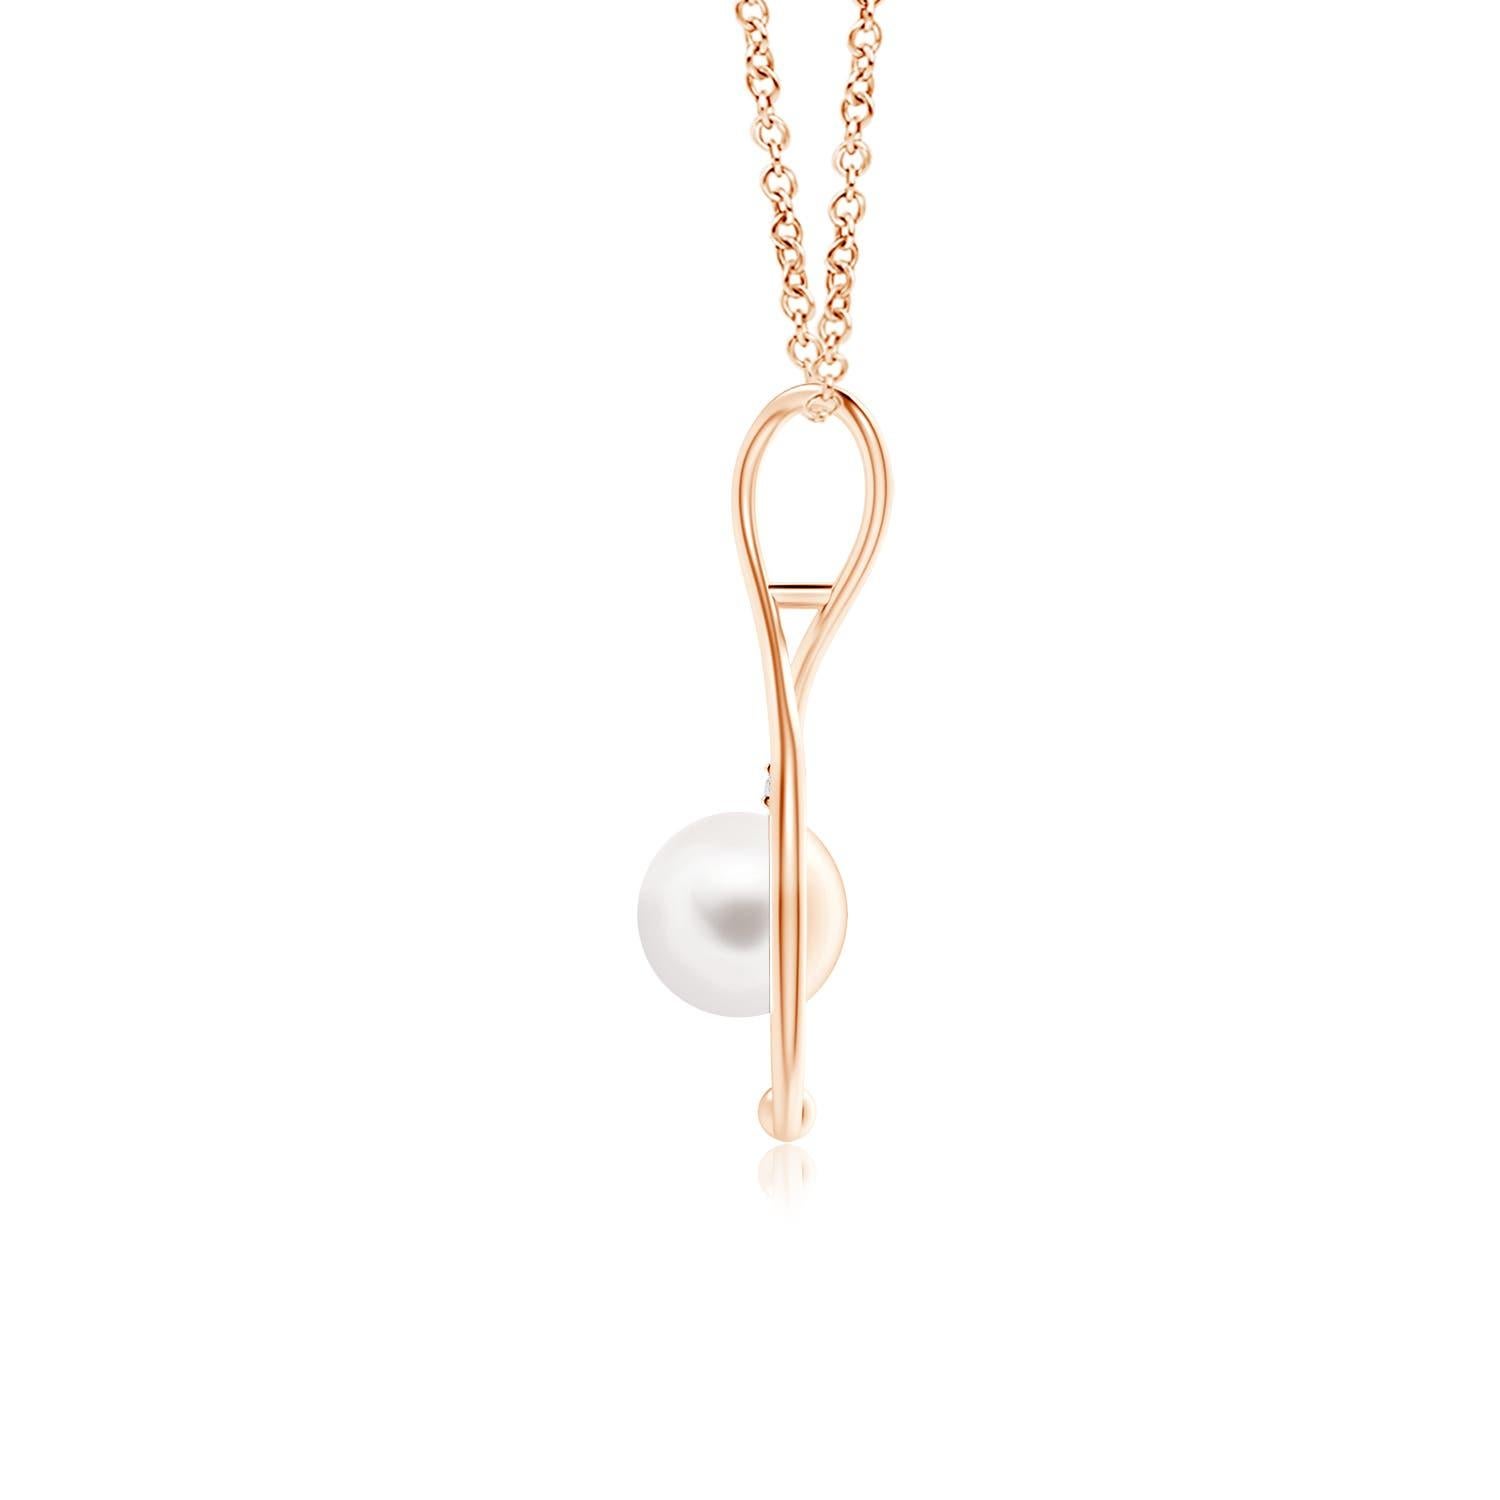 A modern classic, this pearl infinity necklace in 14K rose gold is a beautiful interpretation of the popular infinity symbol. The infinity loop softly cuddles the round Freshwater cultured pearl to evoke a feeling of tenderness. The glimmering